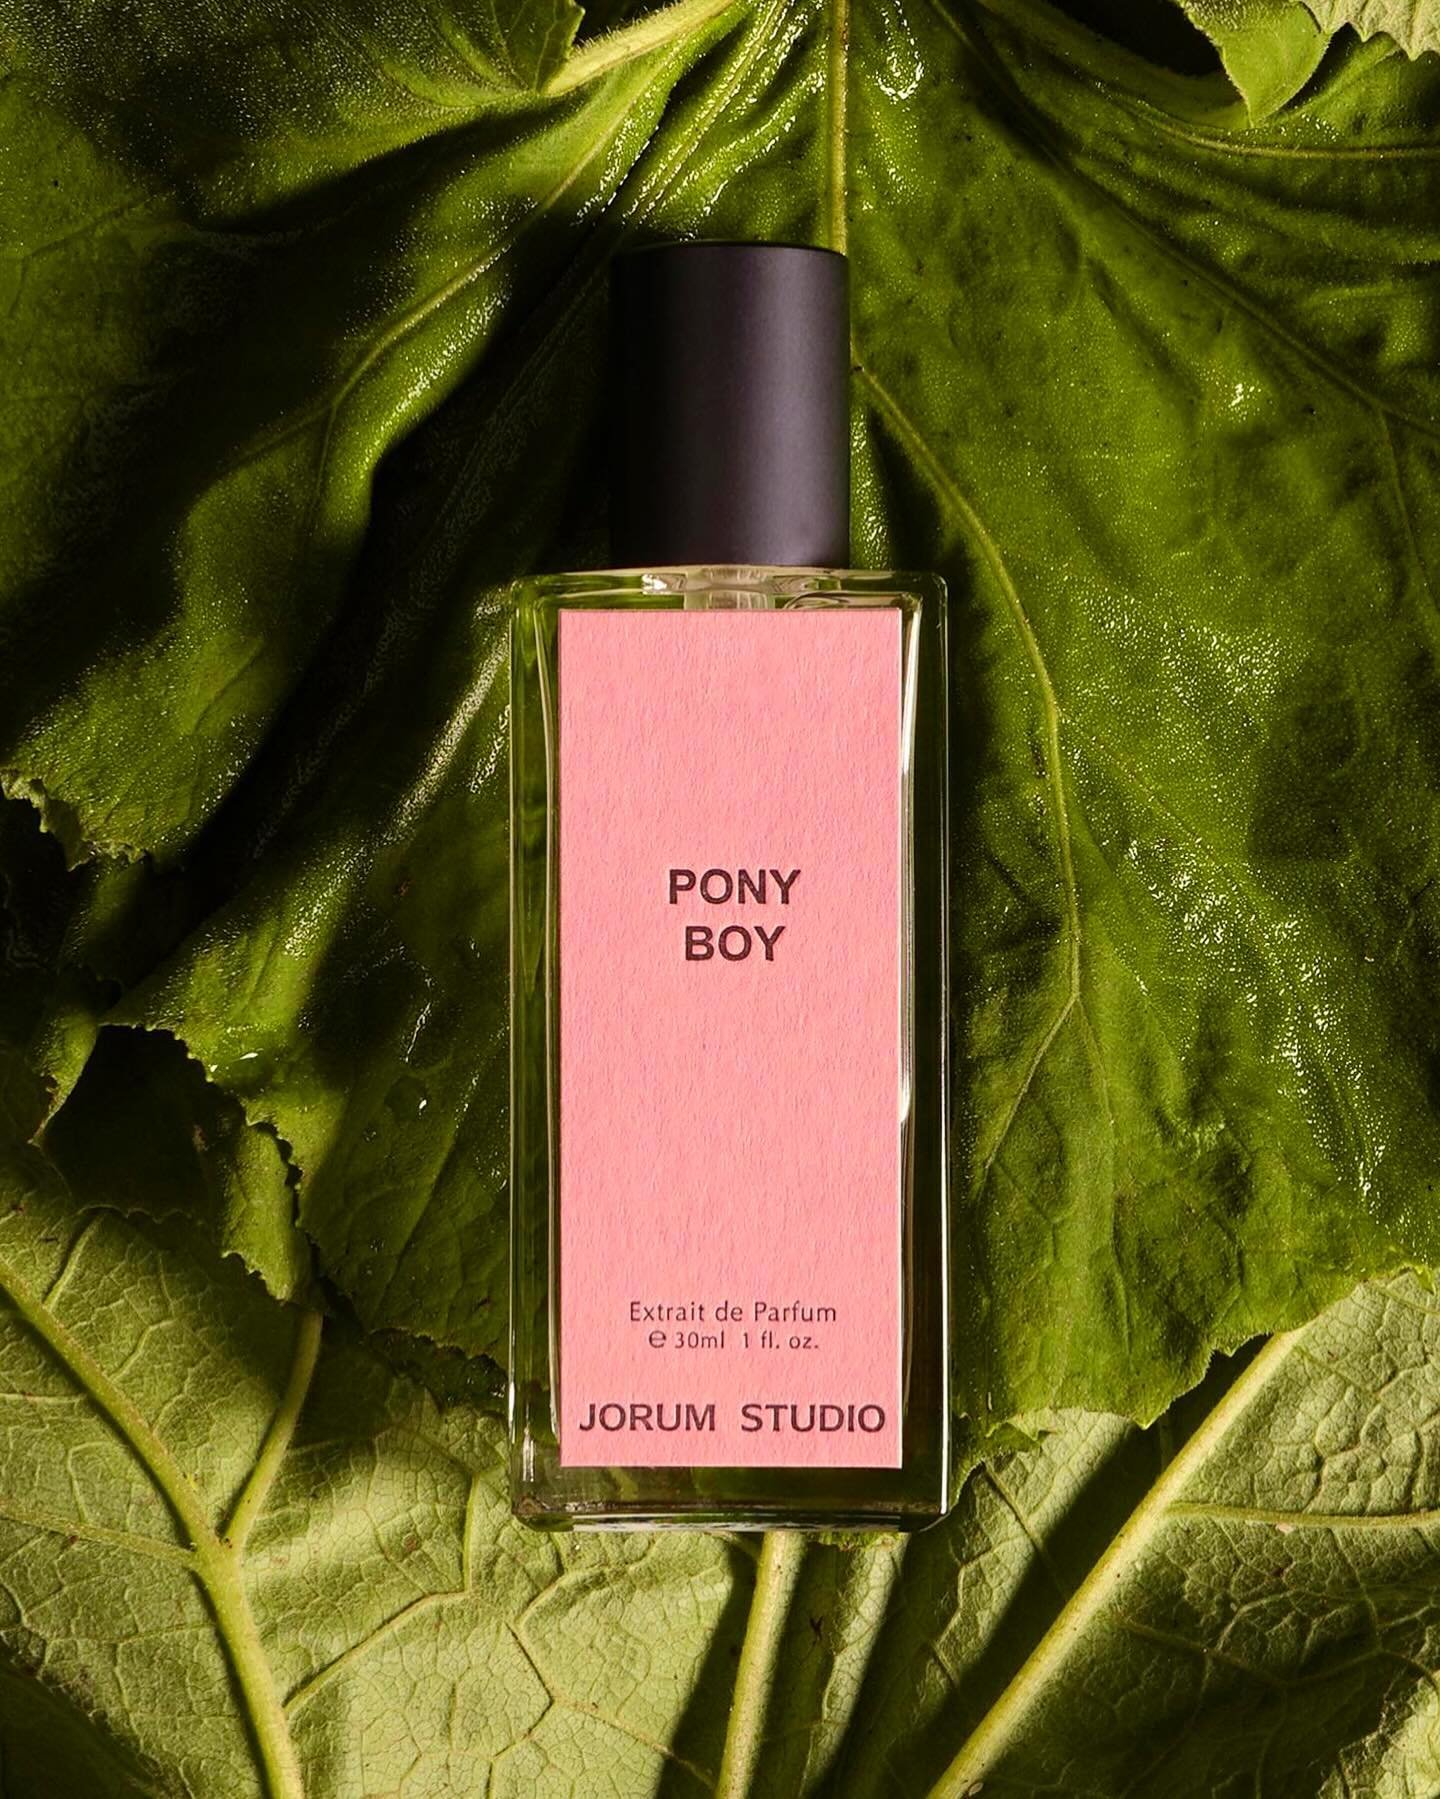 Pony Boy Extrait de Parfum is a fresh, green rhubarb fragrance with steamed cedarwood, brutal beetroot and tempting pink lotus notes. 

An energetic aquatic fragrance, the tingling sourness of Rhubarb with earthy Vetiver and mineral Pink Lotus Absolu